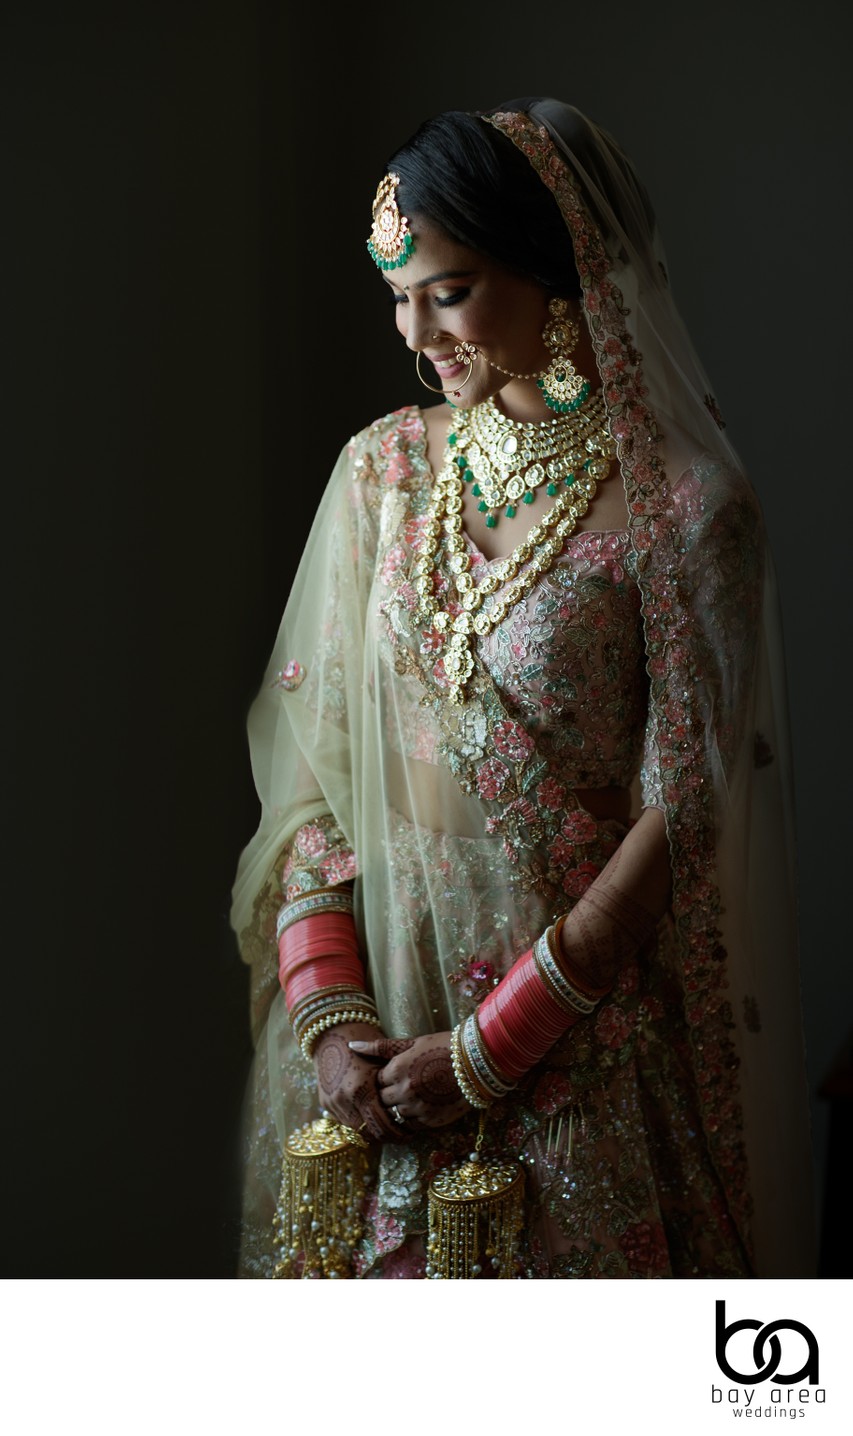 Indian Wedding Ceremony Photography in the Bay Area